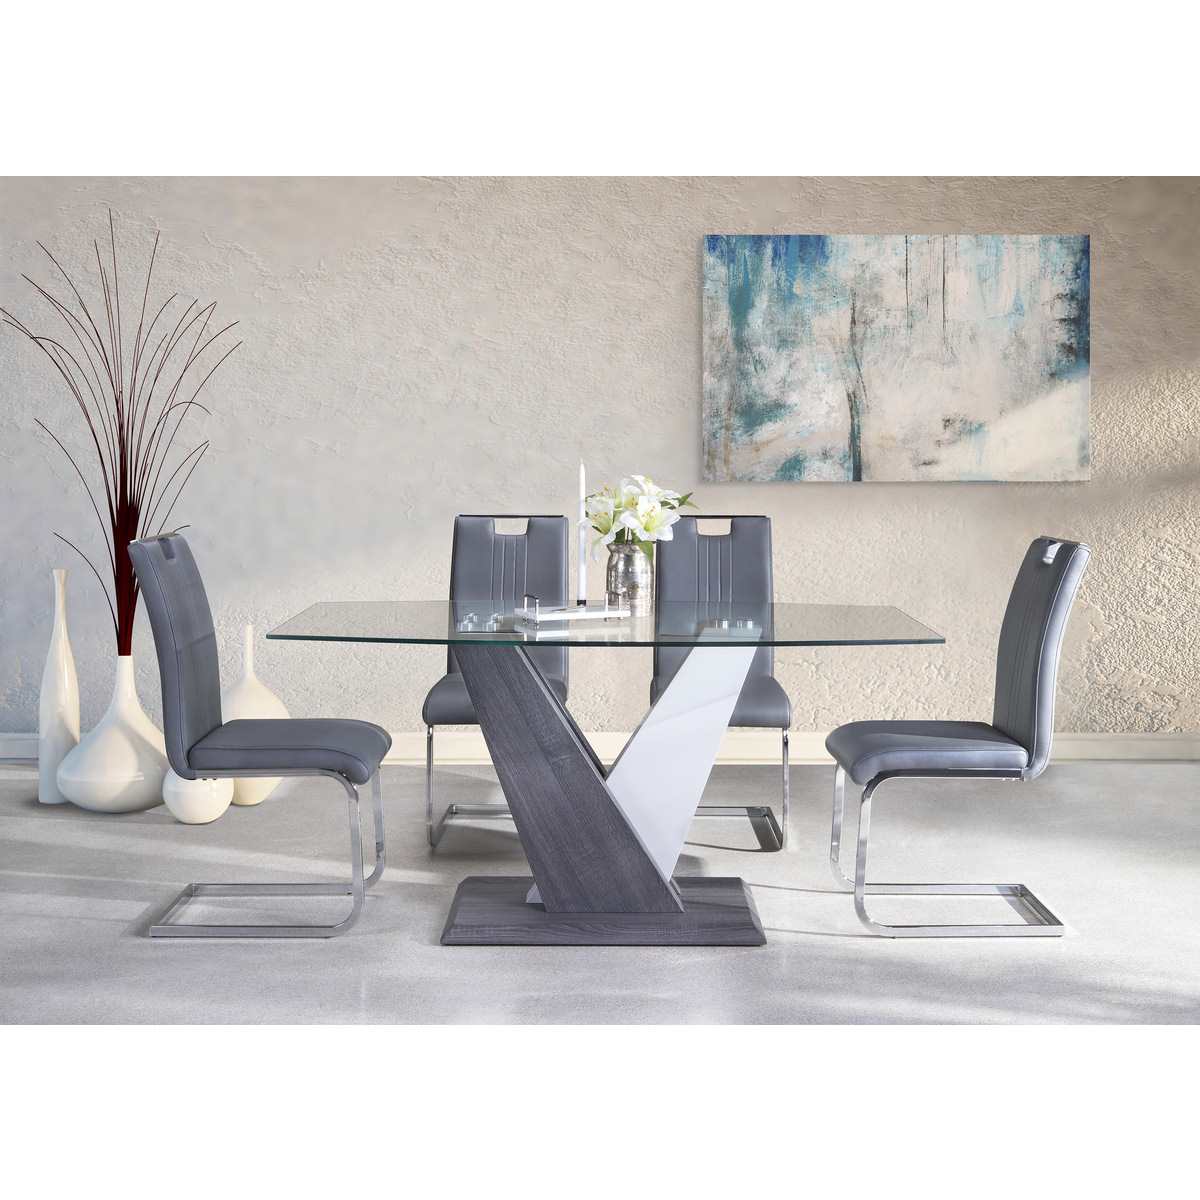 Baxter Dining Collection Grey 7383-63/738S4